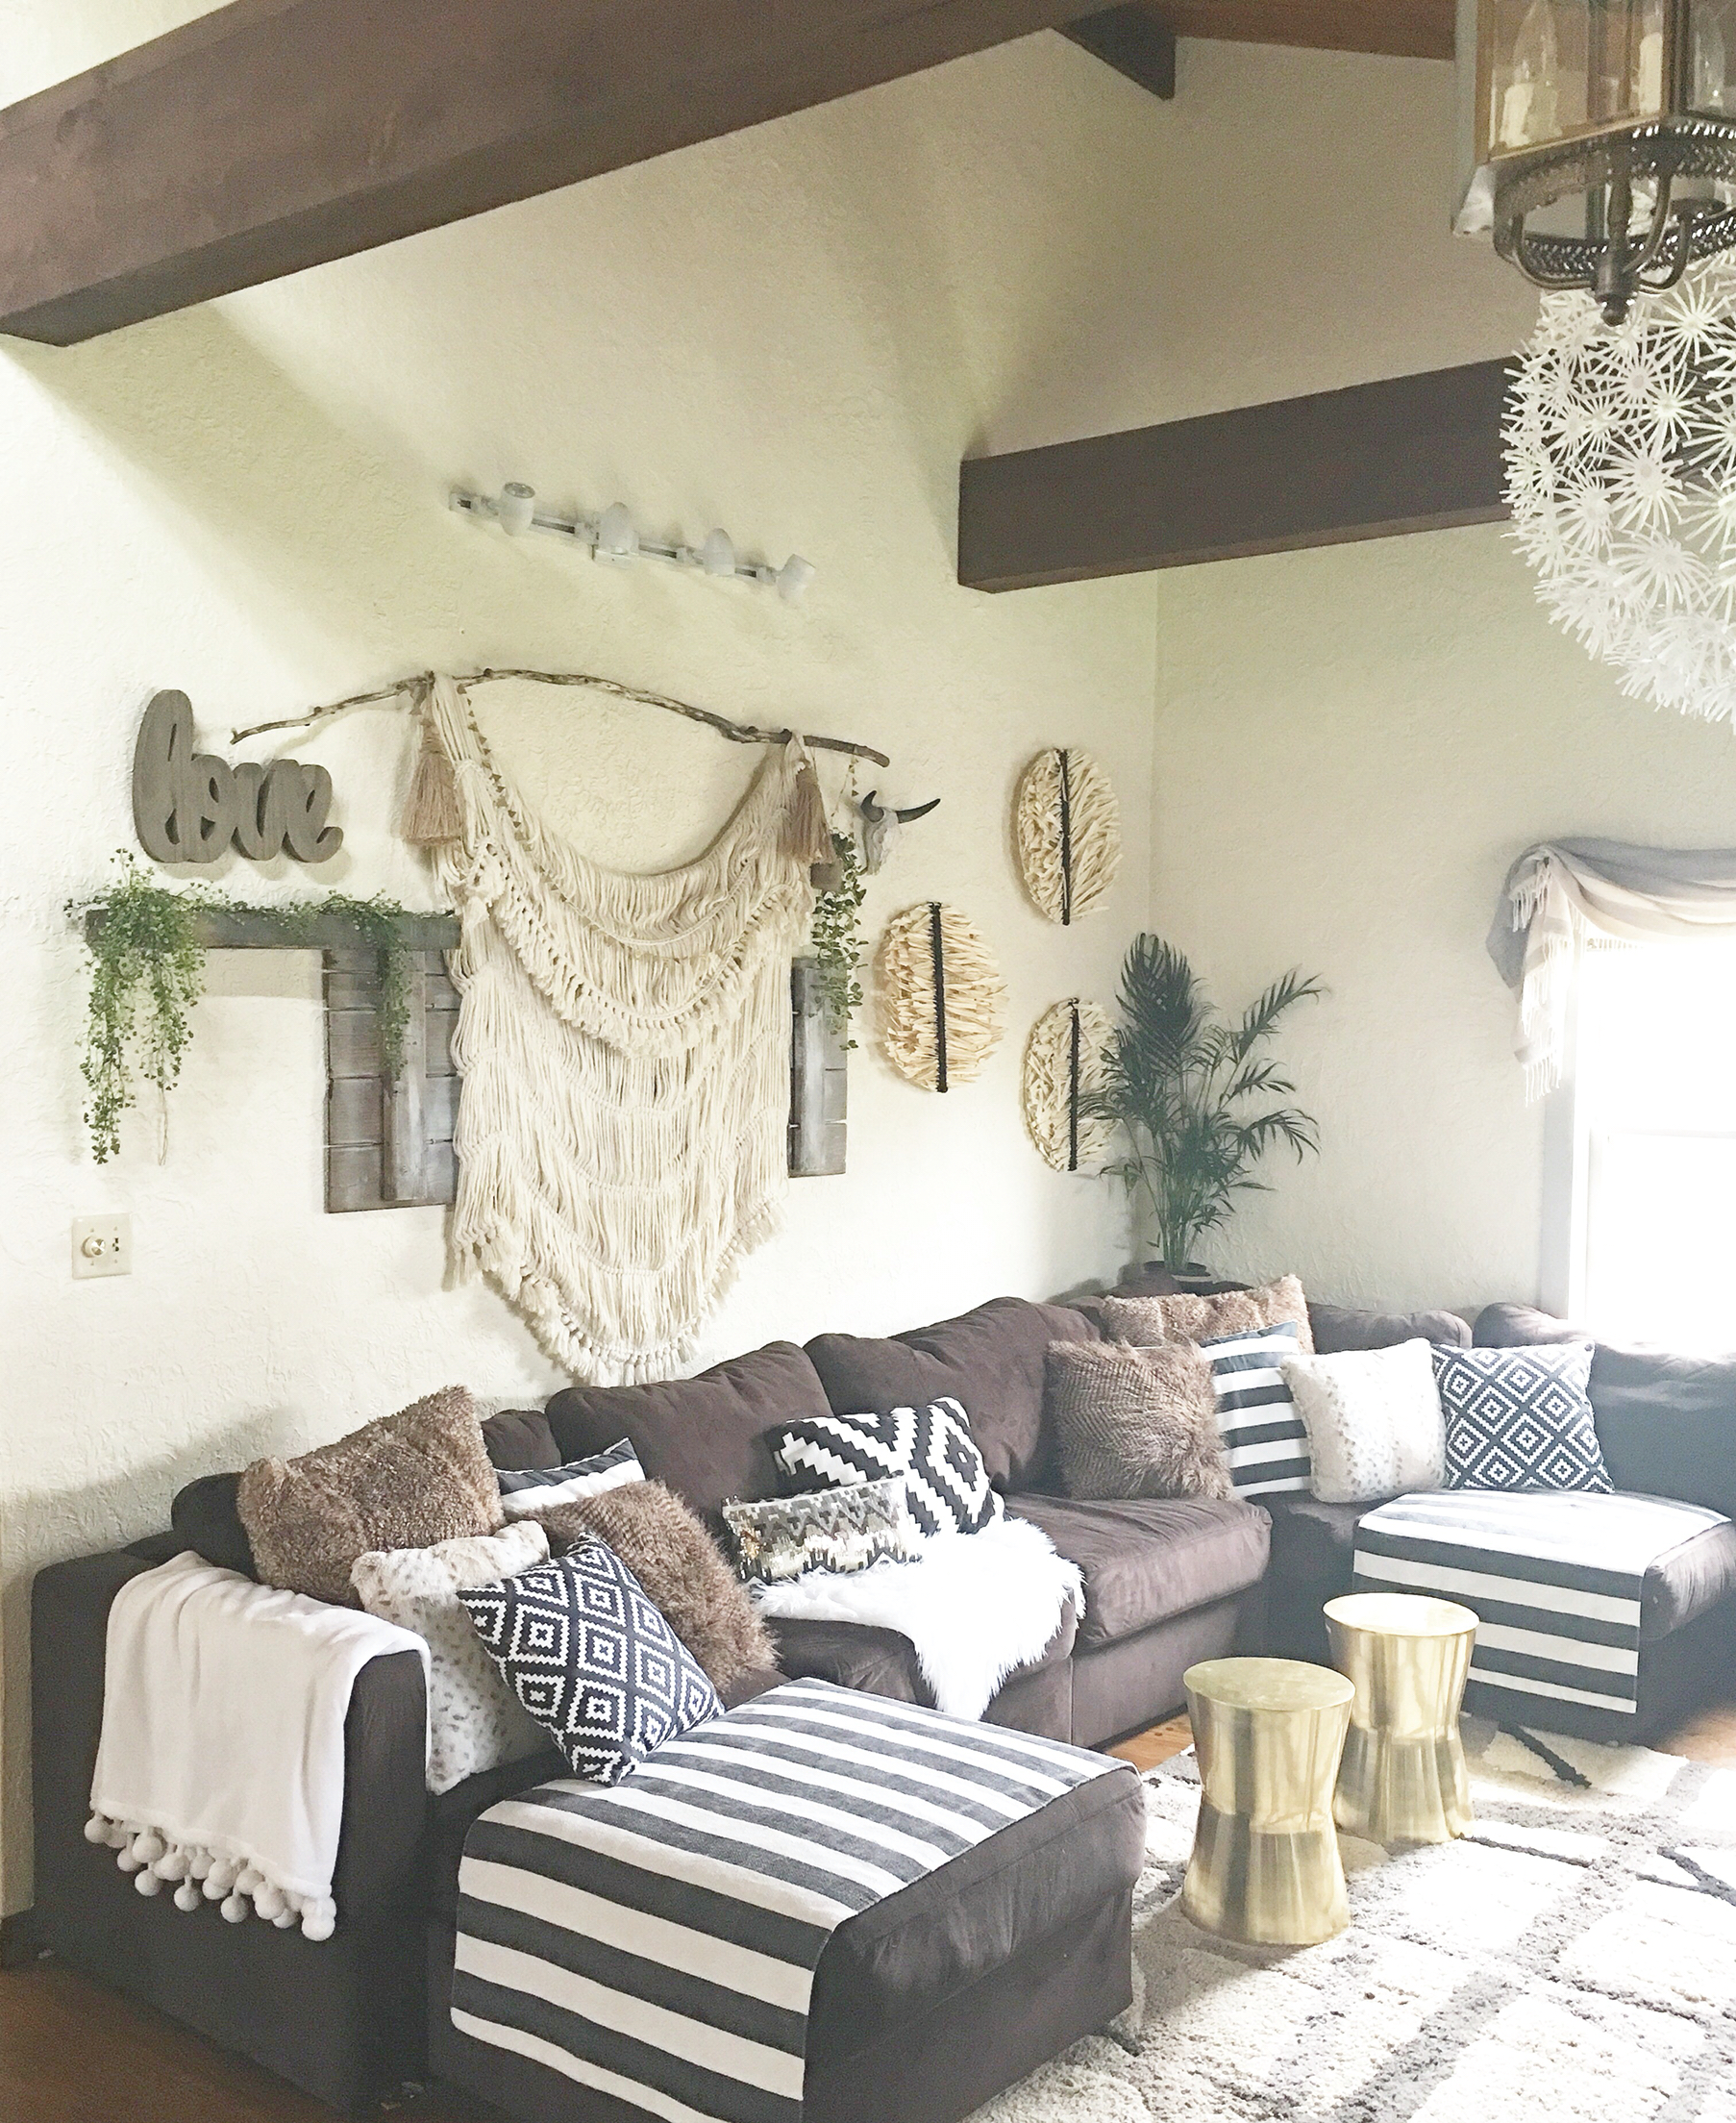 Mixing boho, rustic and glam elements works great for living rooms.